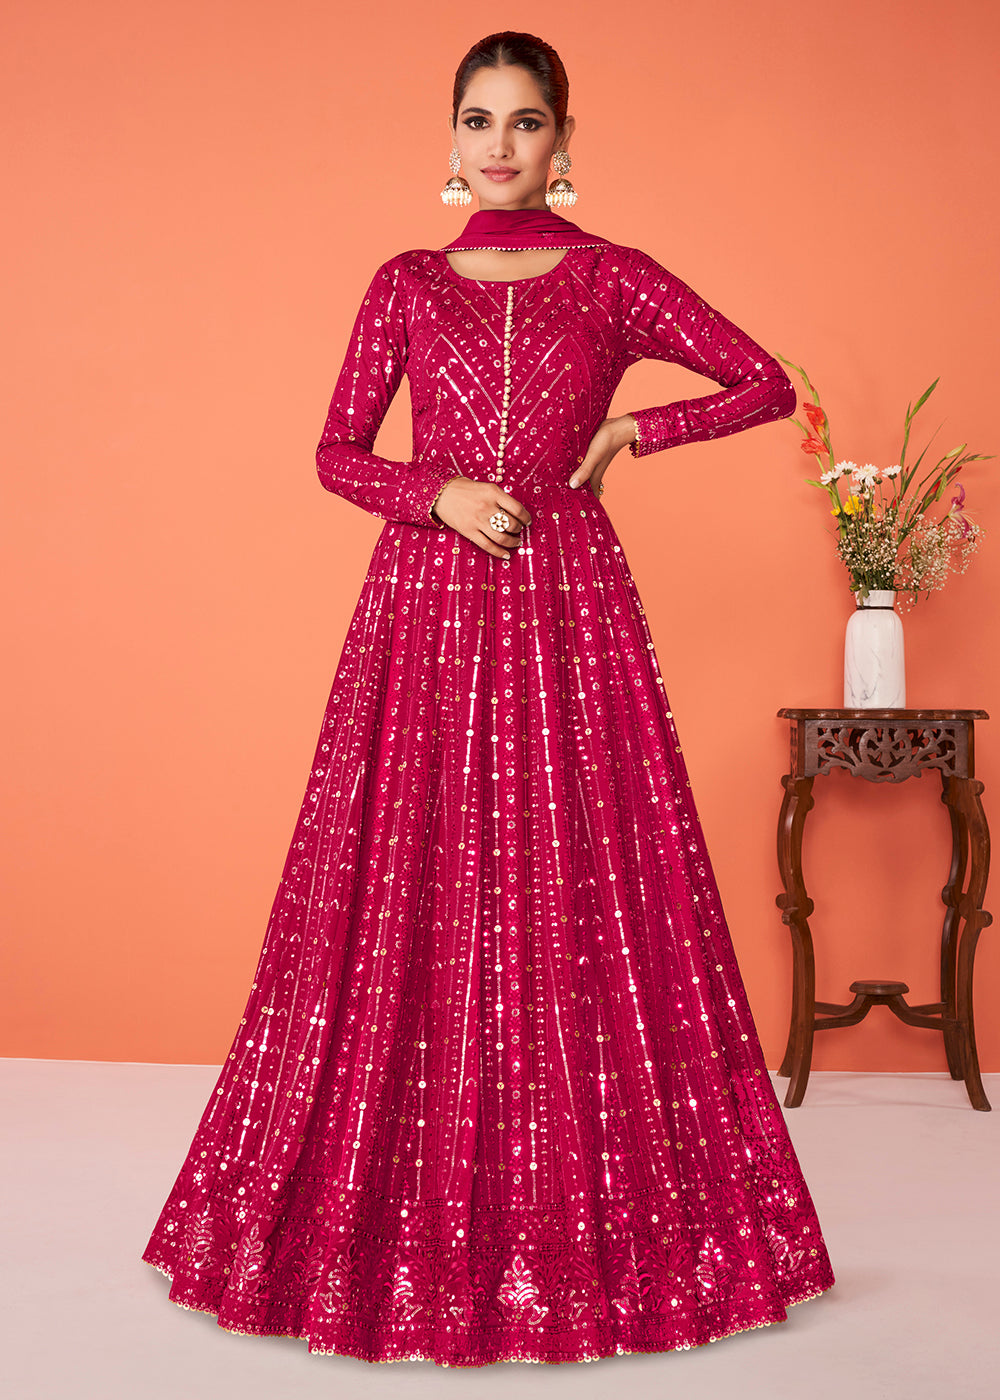 Shop Now Precious Rani Pink Georgette Festive Anarkali Suit Online featuring Vartika SIngh at Empress Clothing in USA.